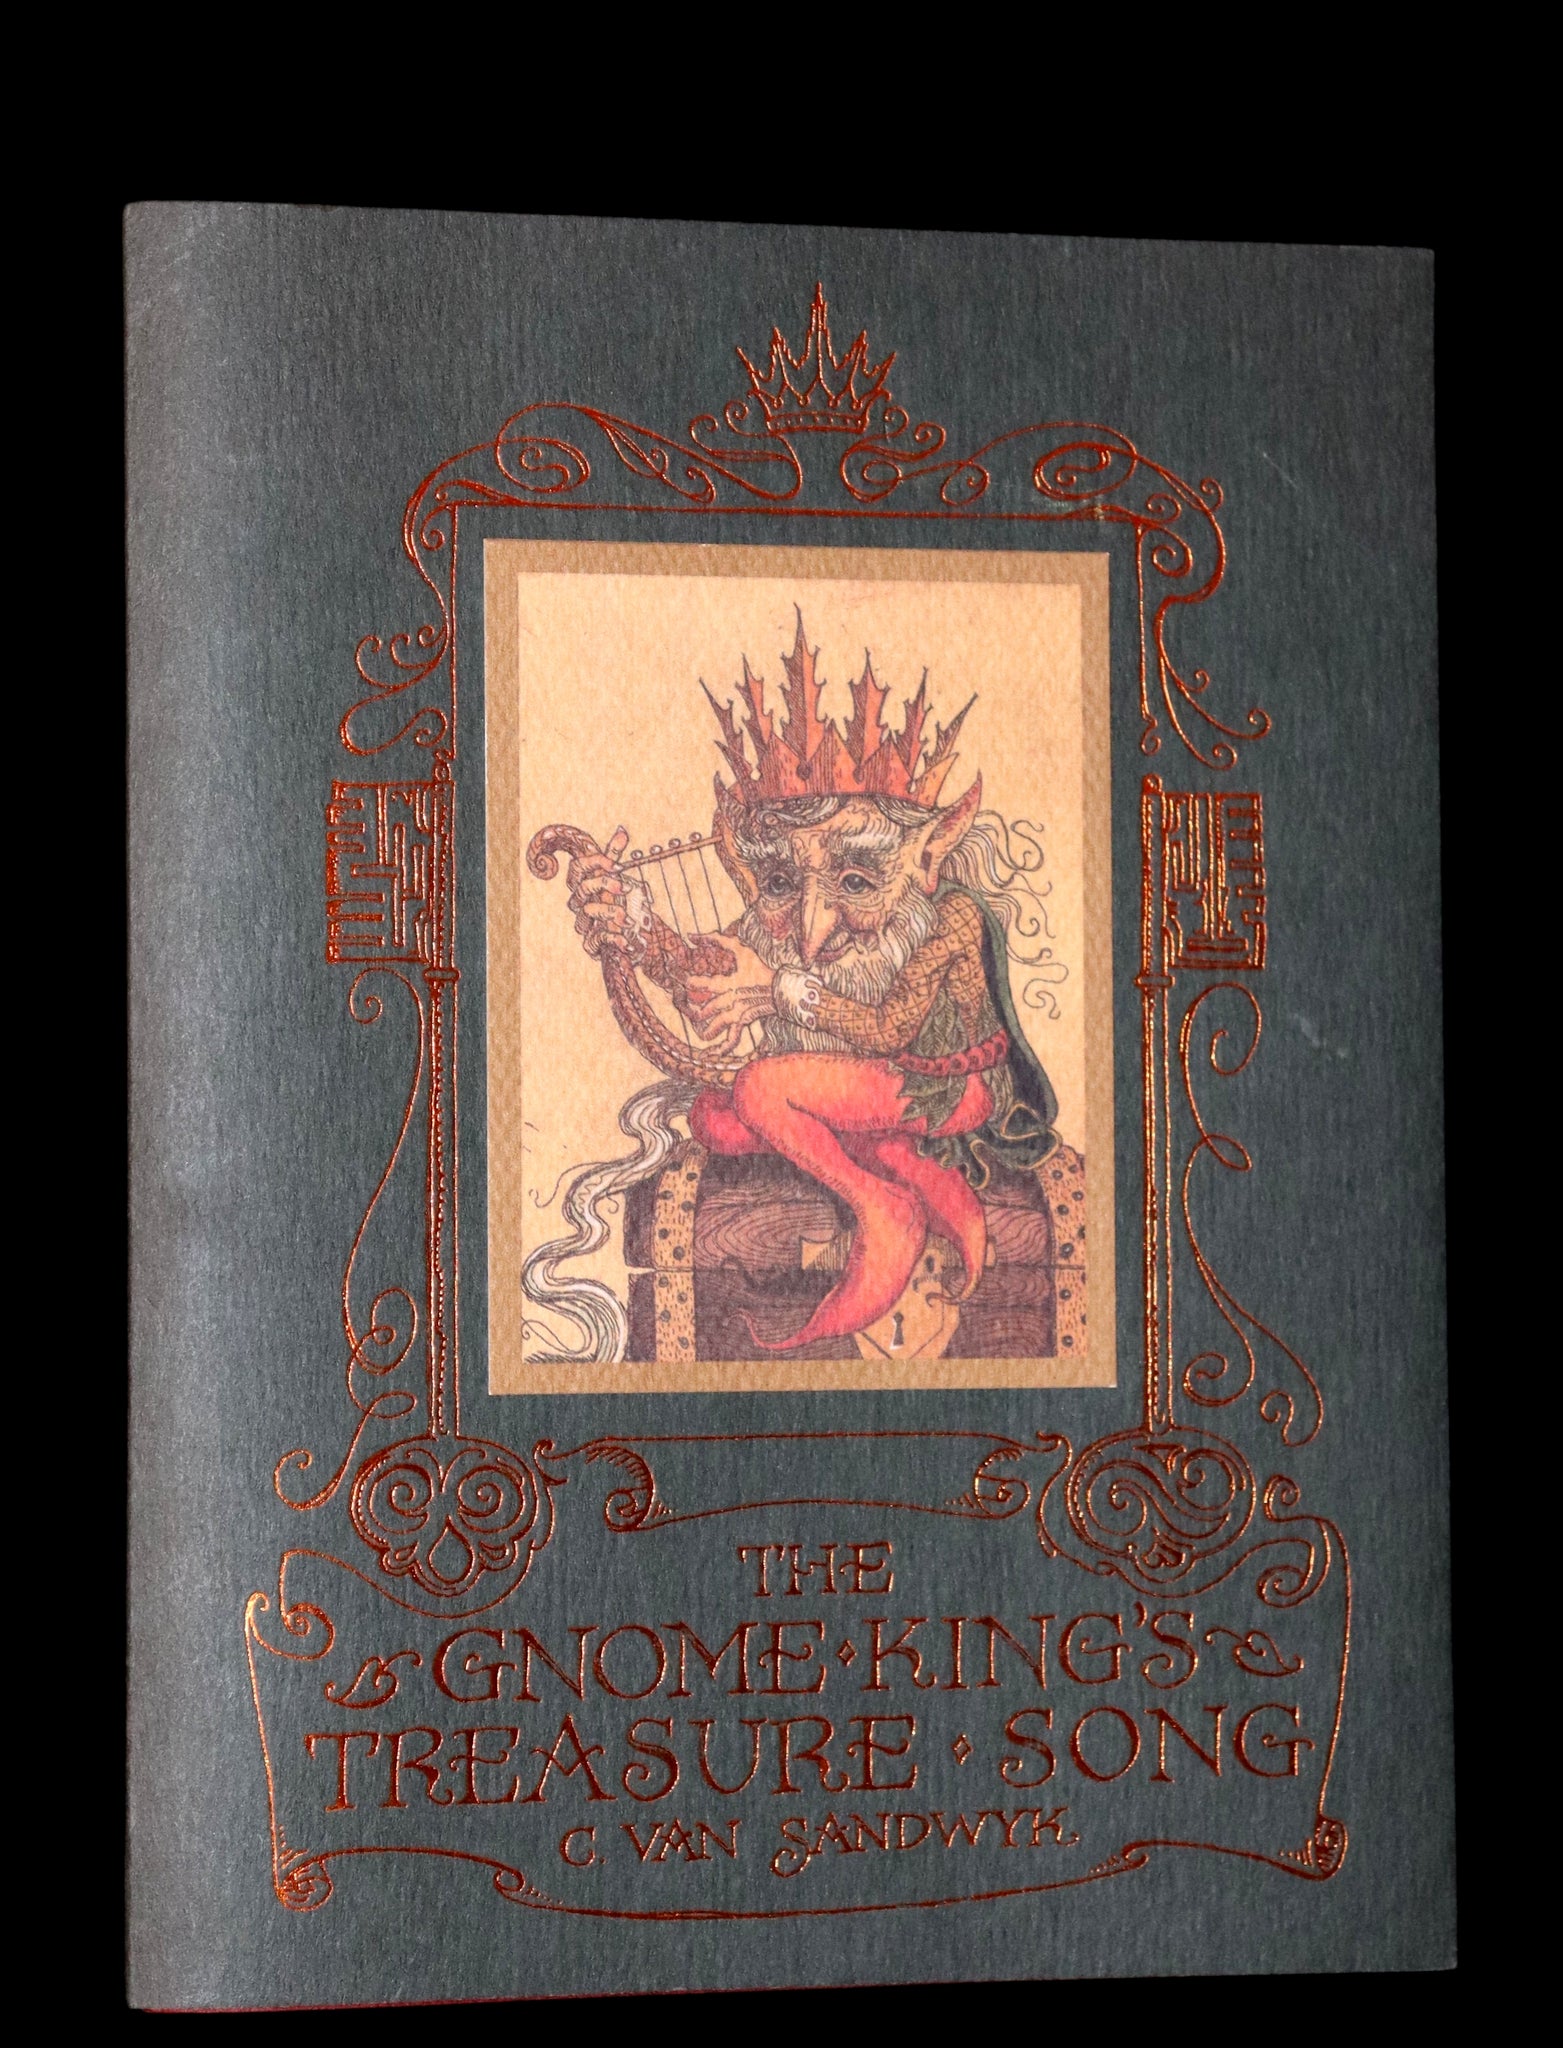 2000 Scarce First Edition - The Gnome King’s Treasure Song by Charles van Sandwyk.